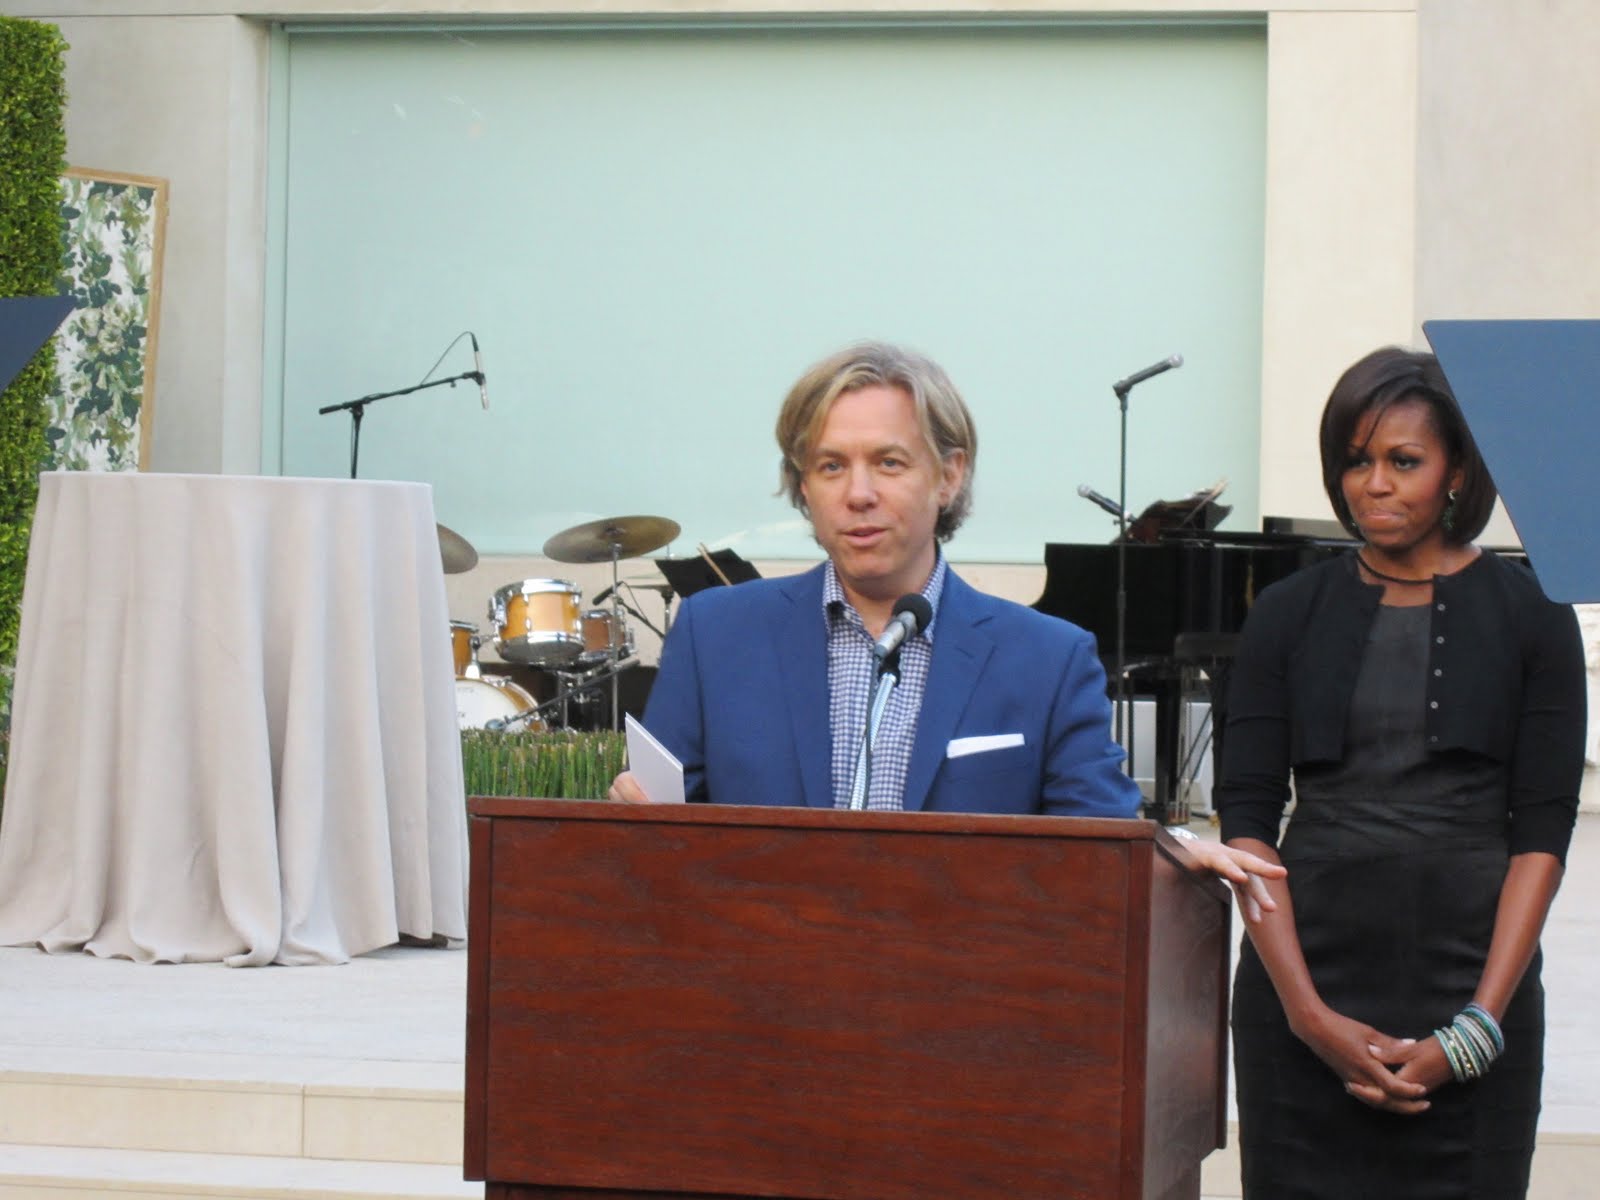 Michael welcomed guests to his home and introduced Mrs. Obama. (above 